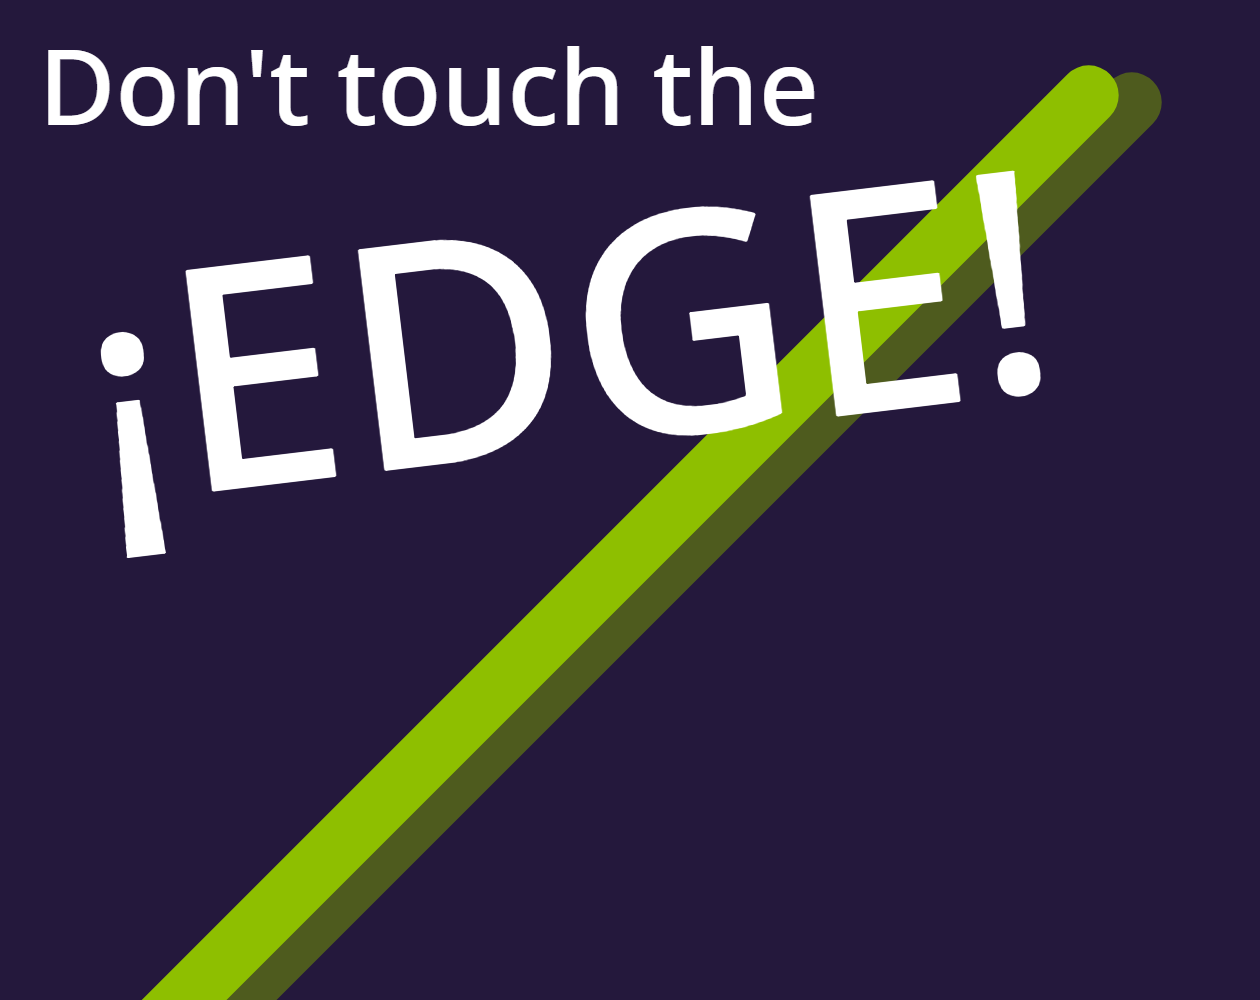 Don't touch the edge